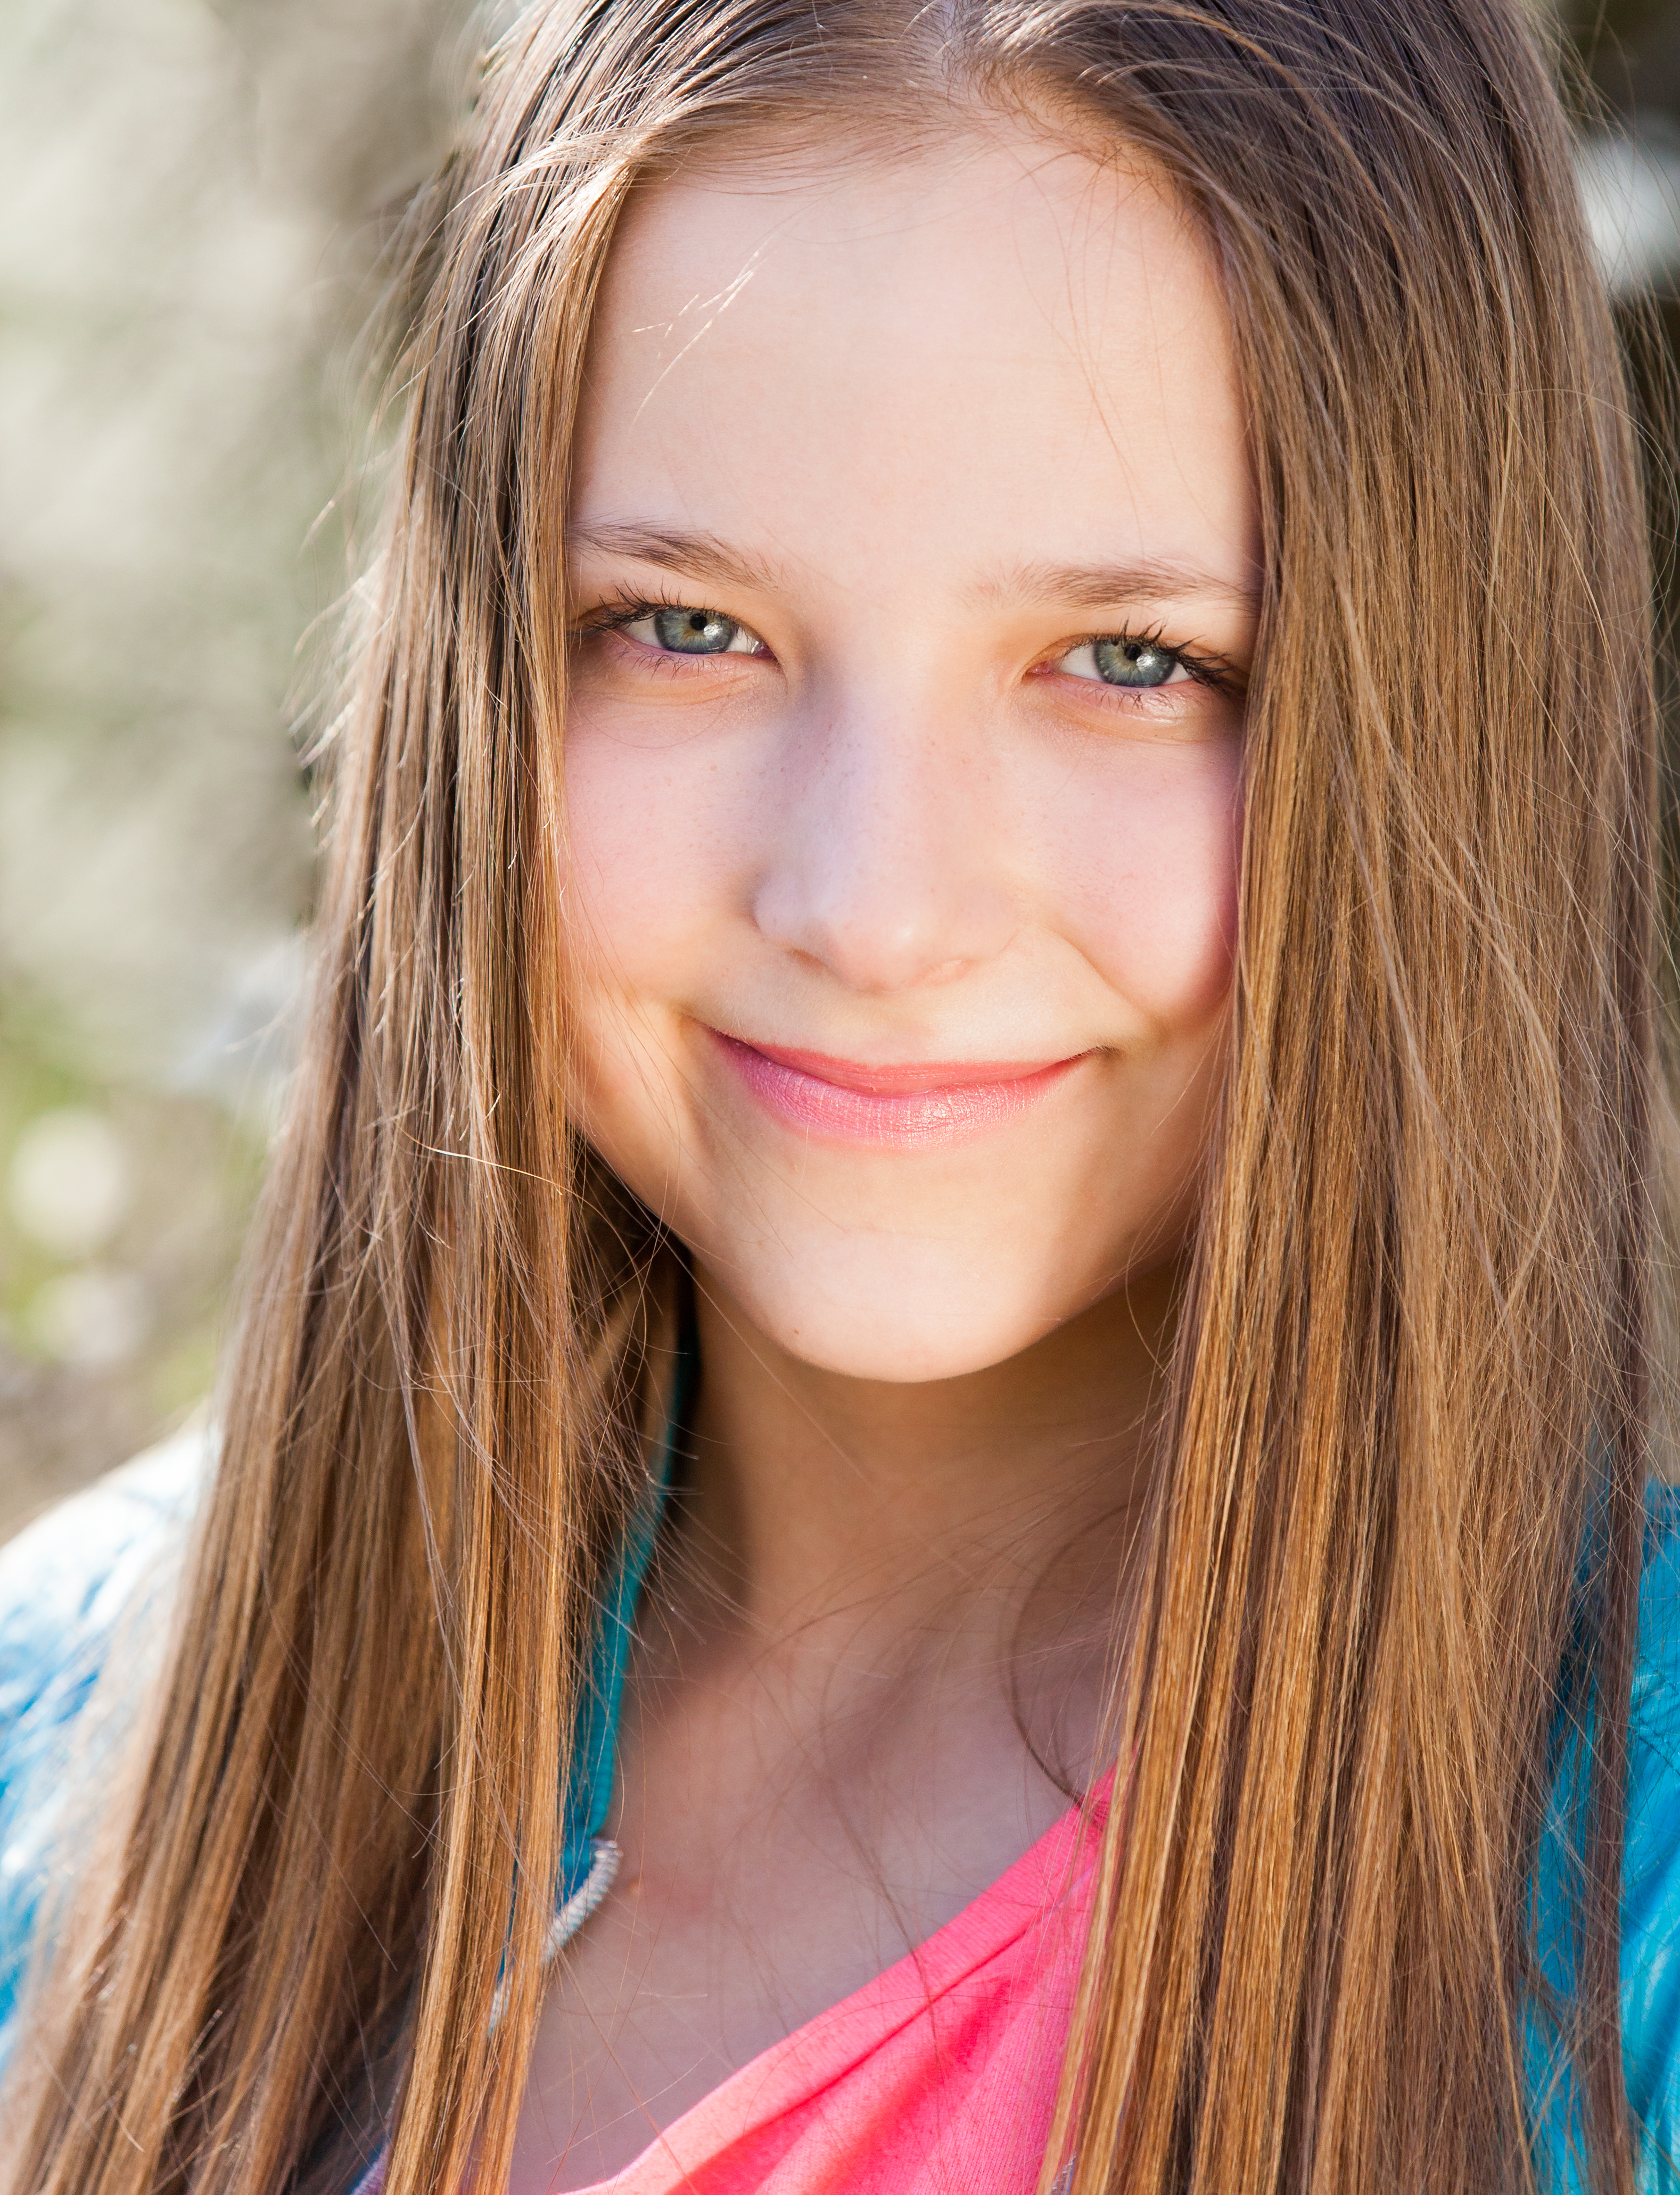 New free photos by RSS. a 12-year-old girl photographed in April 2015, pict...